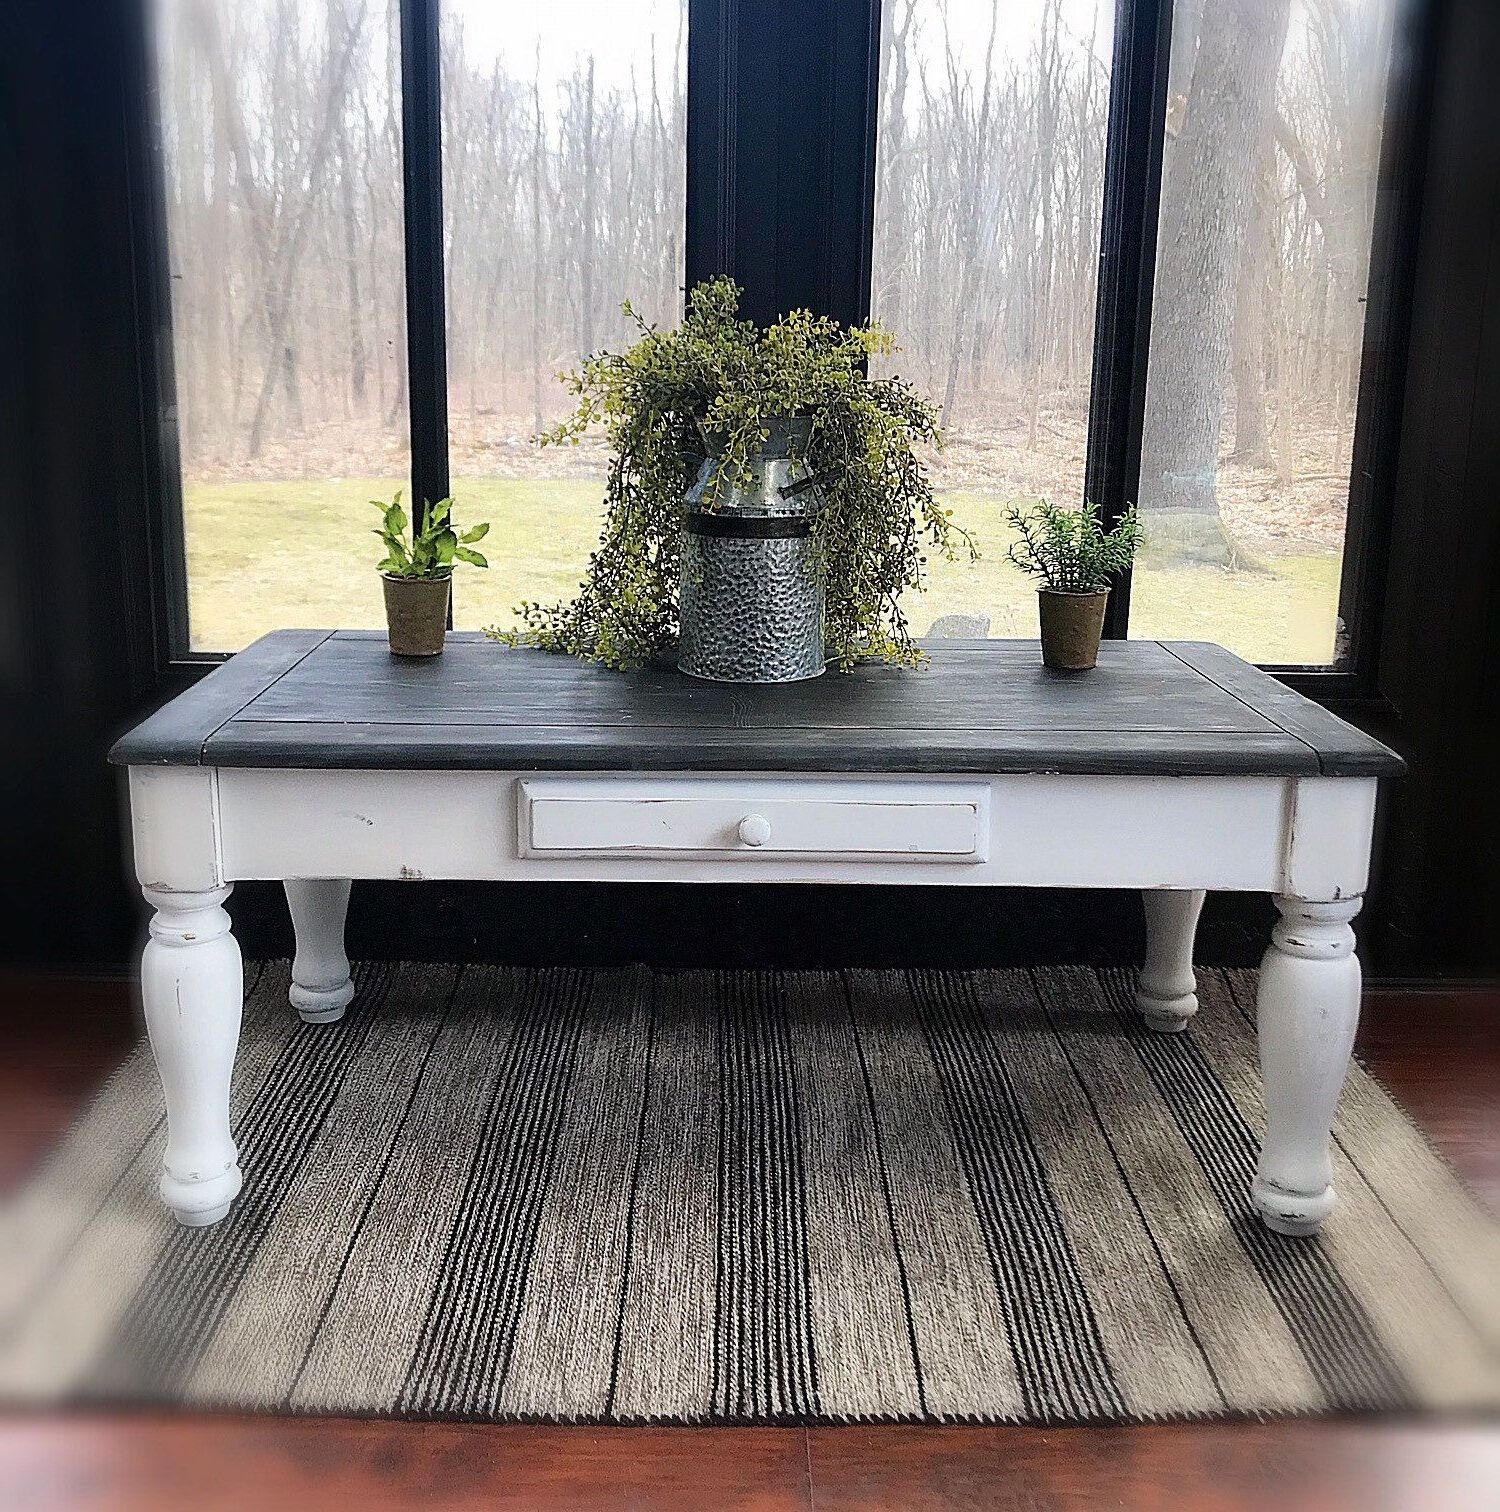 Gorgeous Farmhouse Coffee Table /rustic Wooden Table/country Living Within Living Room Farmhouse Coffee Tables (Gallery 20 of 20)